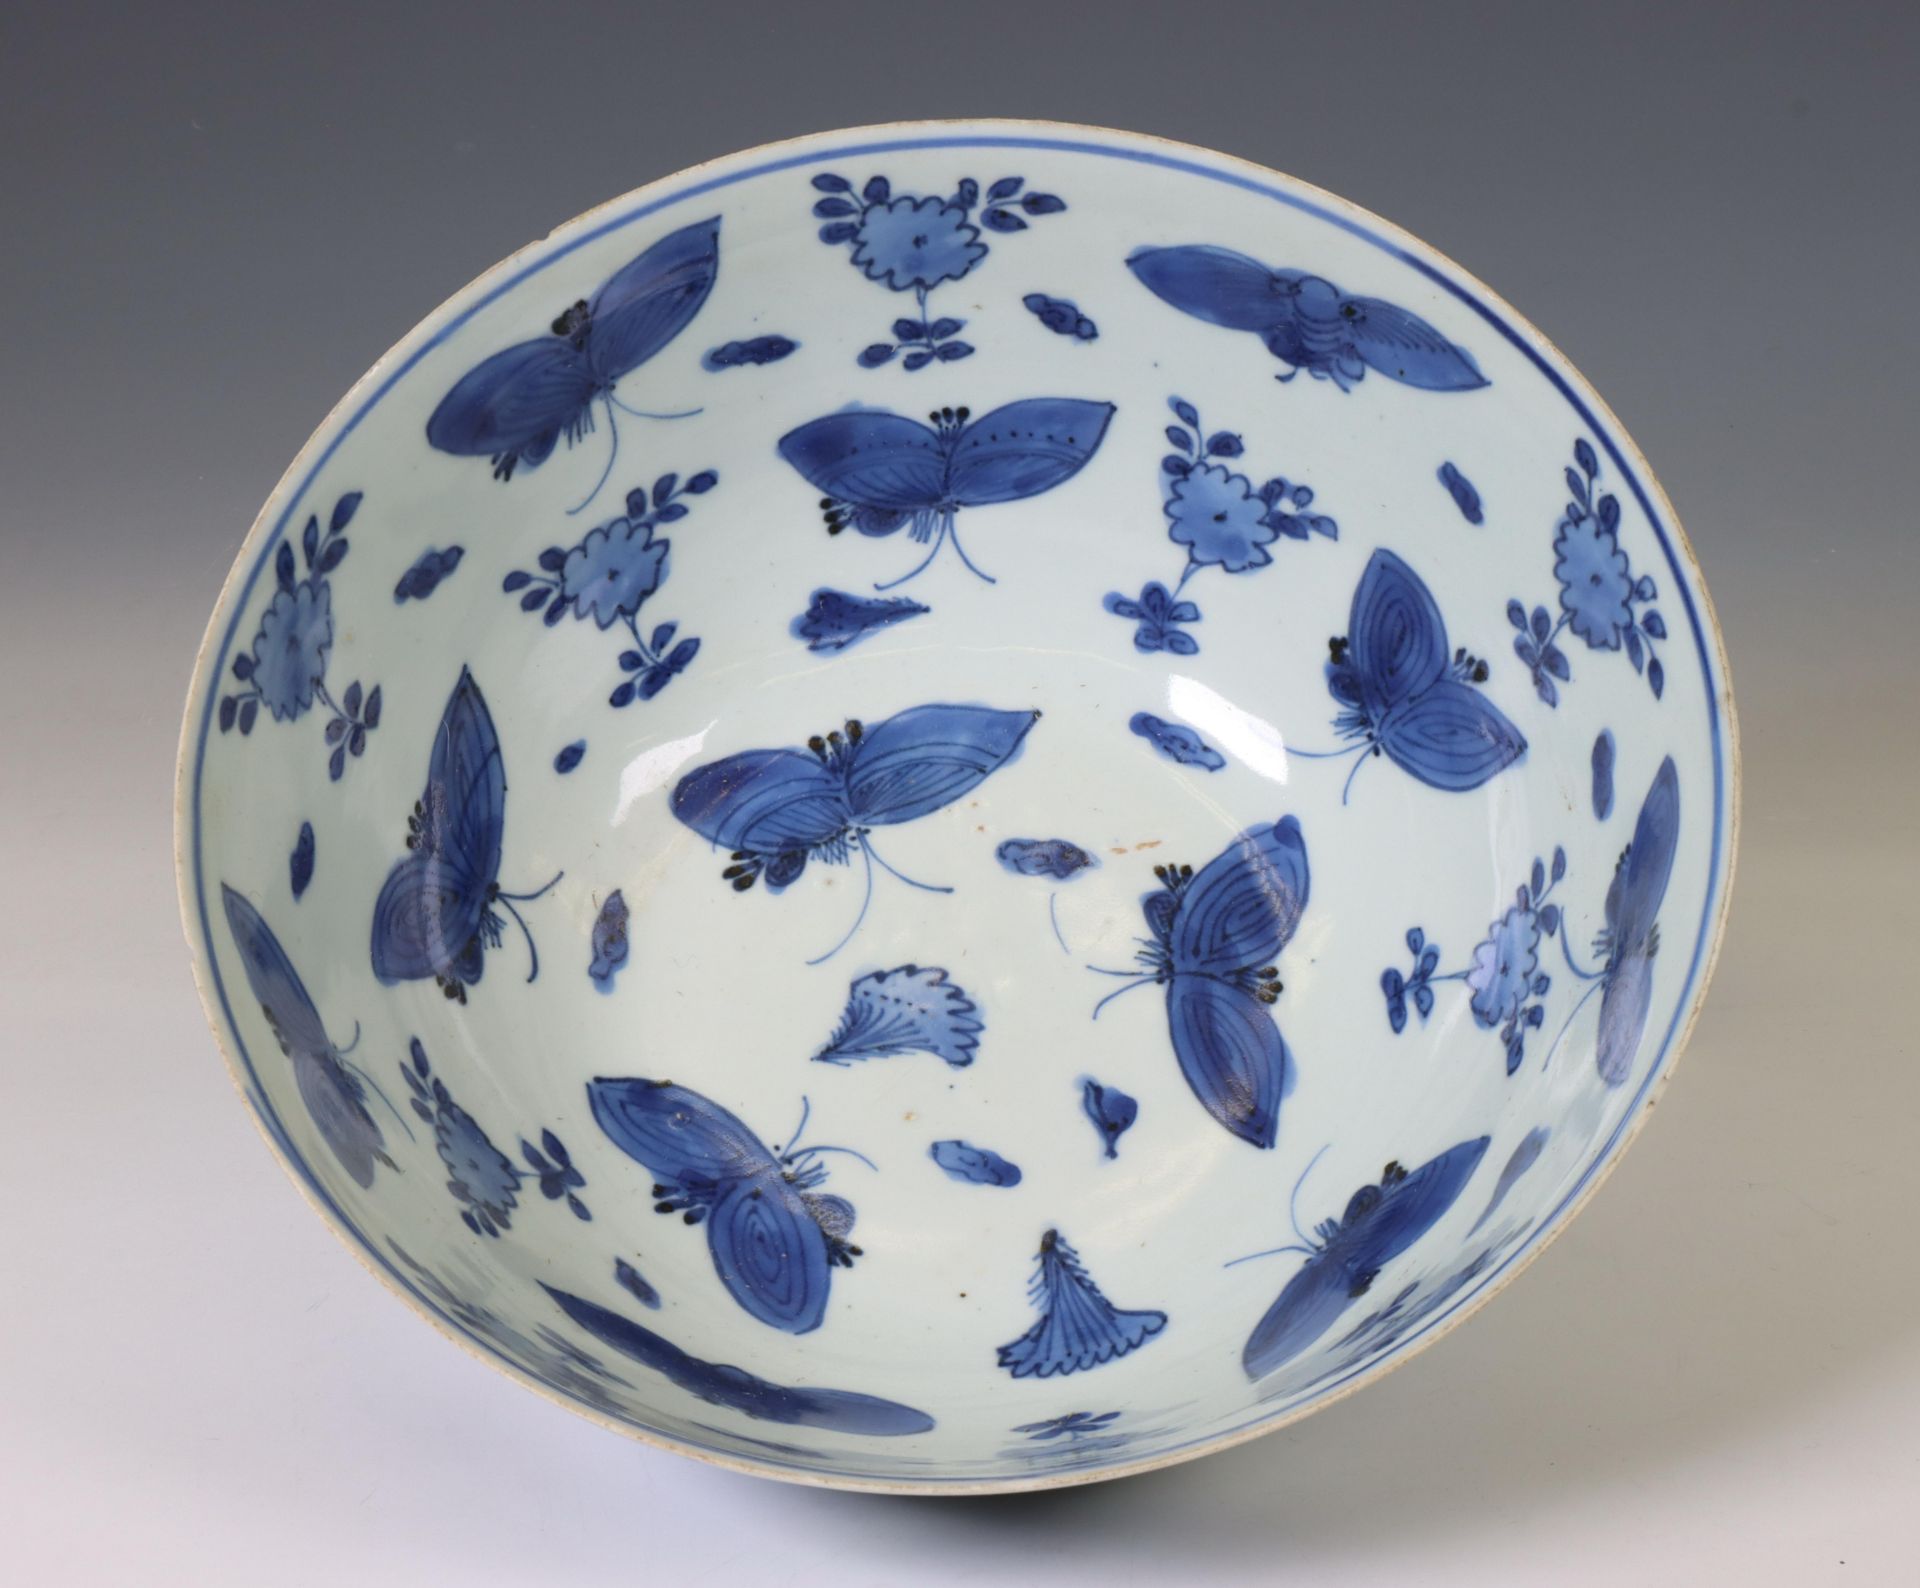 China, blue and white porcelain bowl, 17th century,